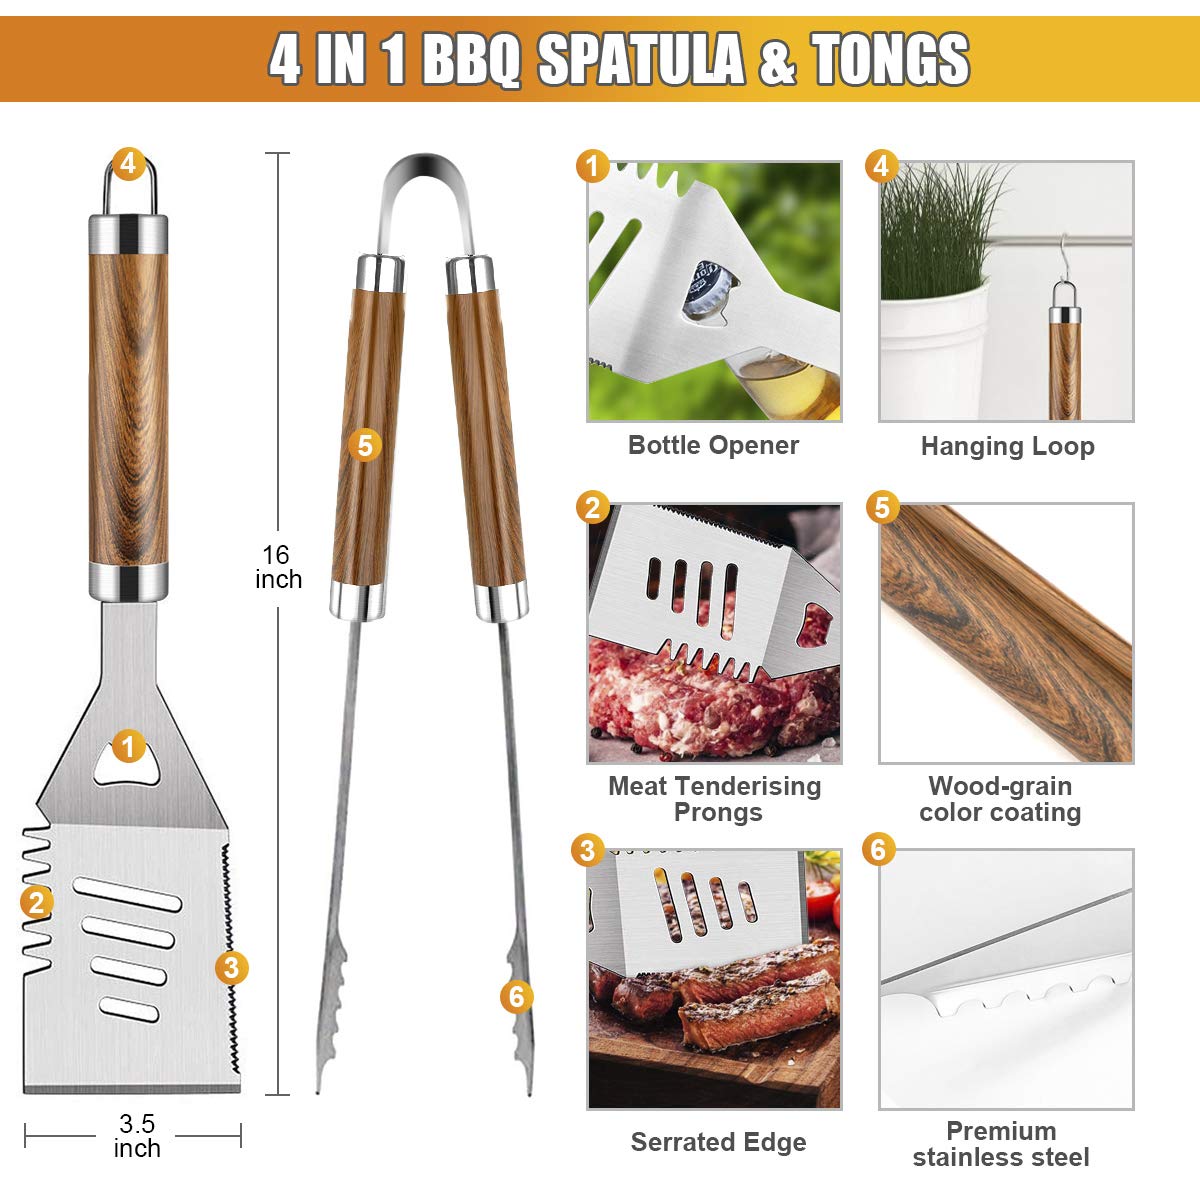 BBQ Grill Accessories Set, 38Pcs Stainless Steel Grill Tools Grilling Accessories with Aluminum Case, for Camping/Backyard Barbecue - image 3 of 7